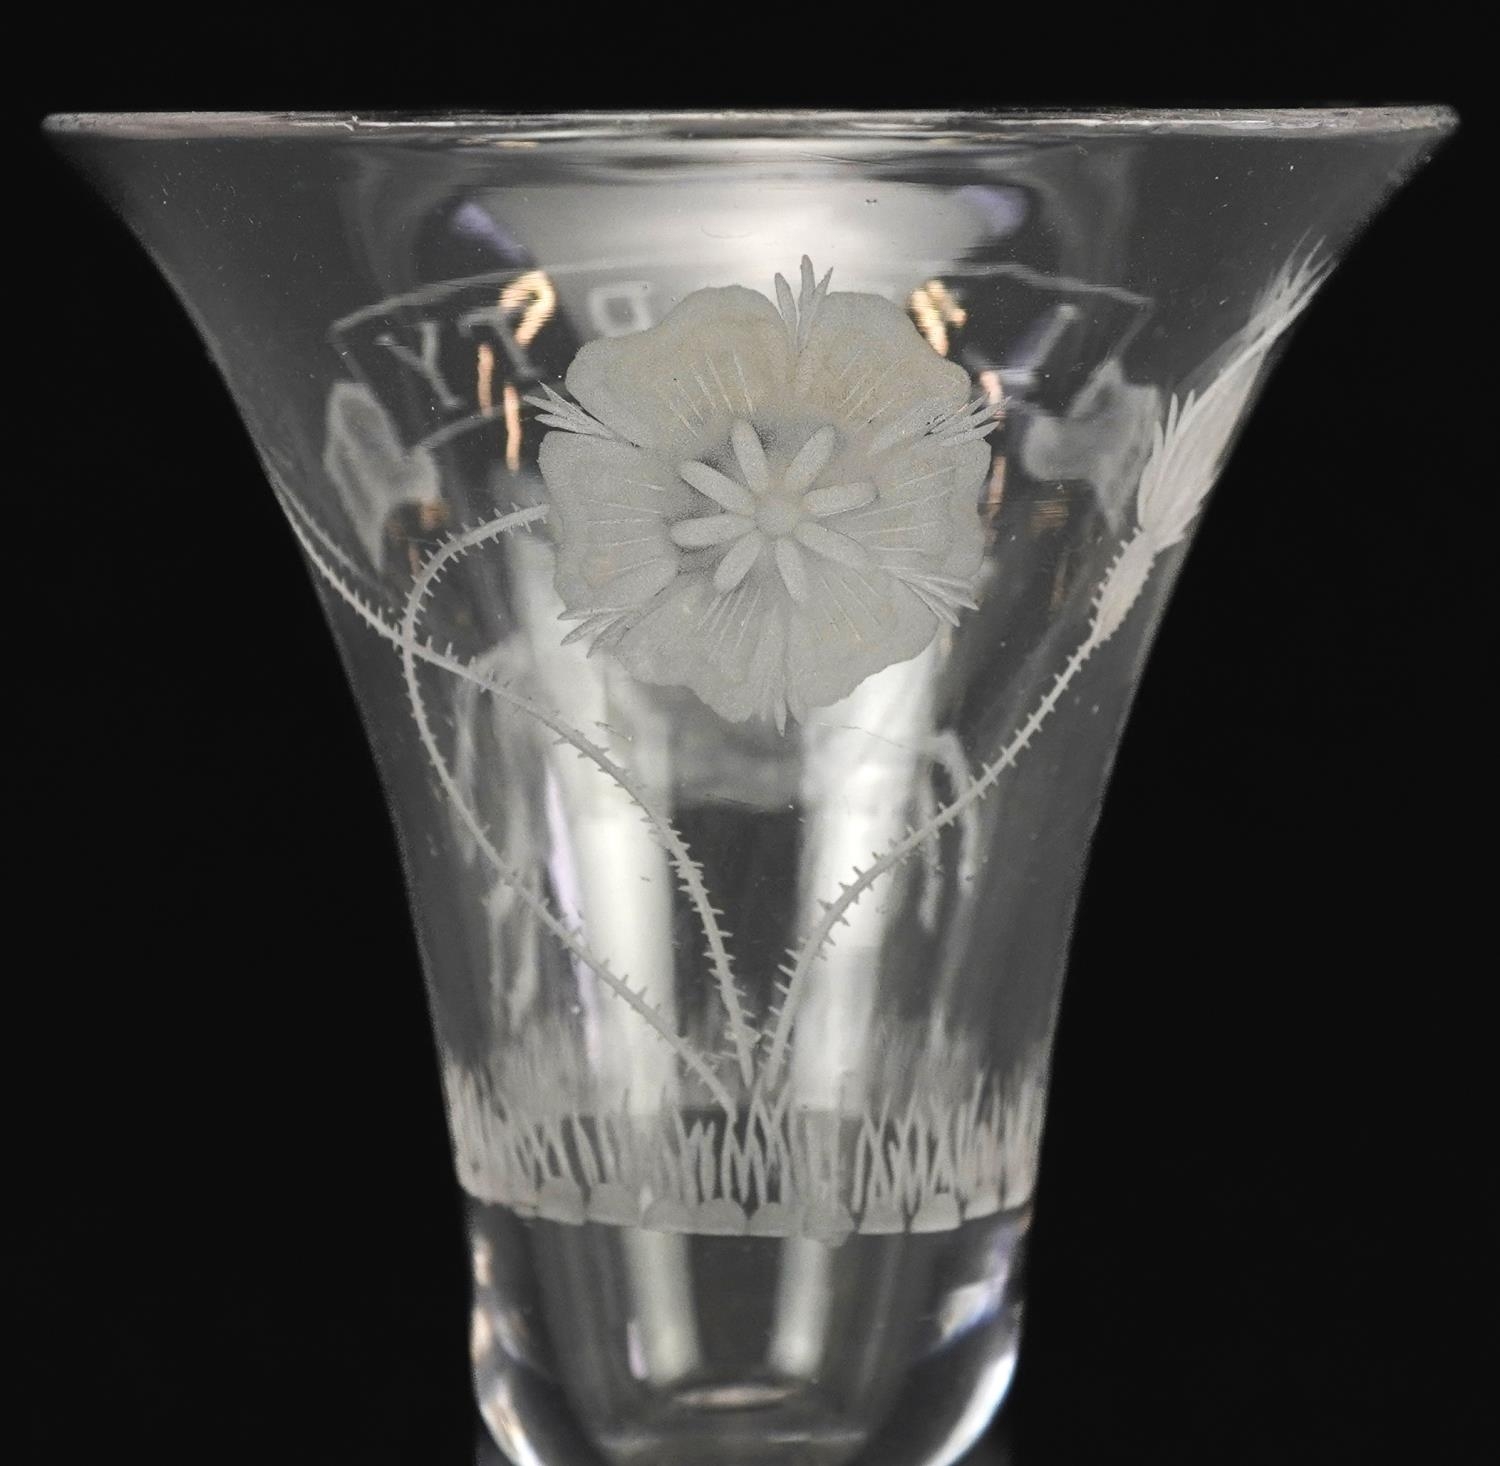 18th century antique Jacobite liberty wine glass engraved with a Jacobite rose and leaping horse, - Image 4 of 5